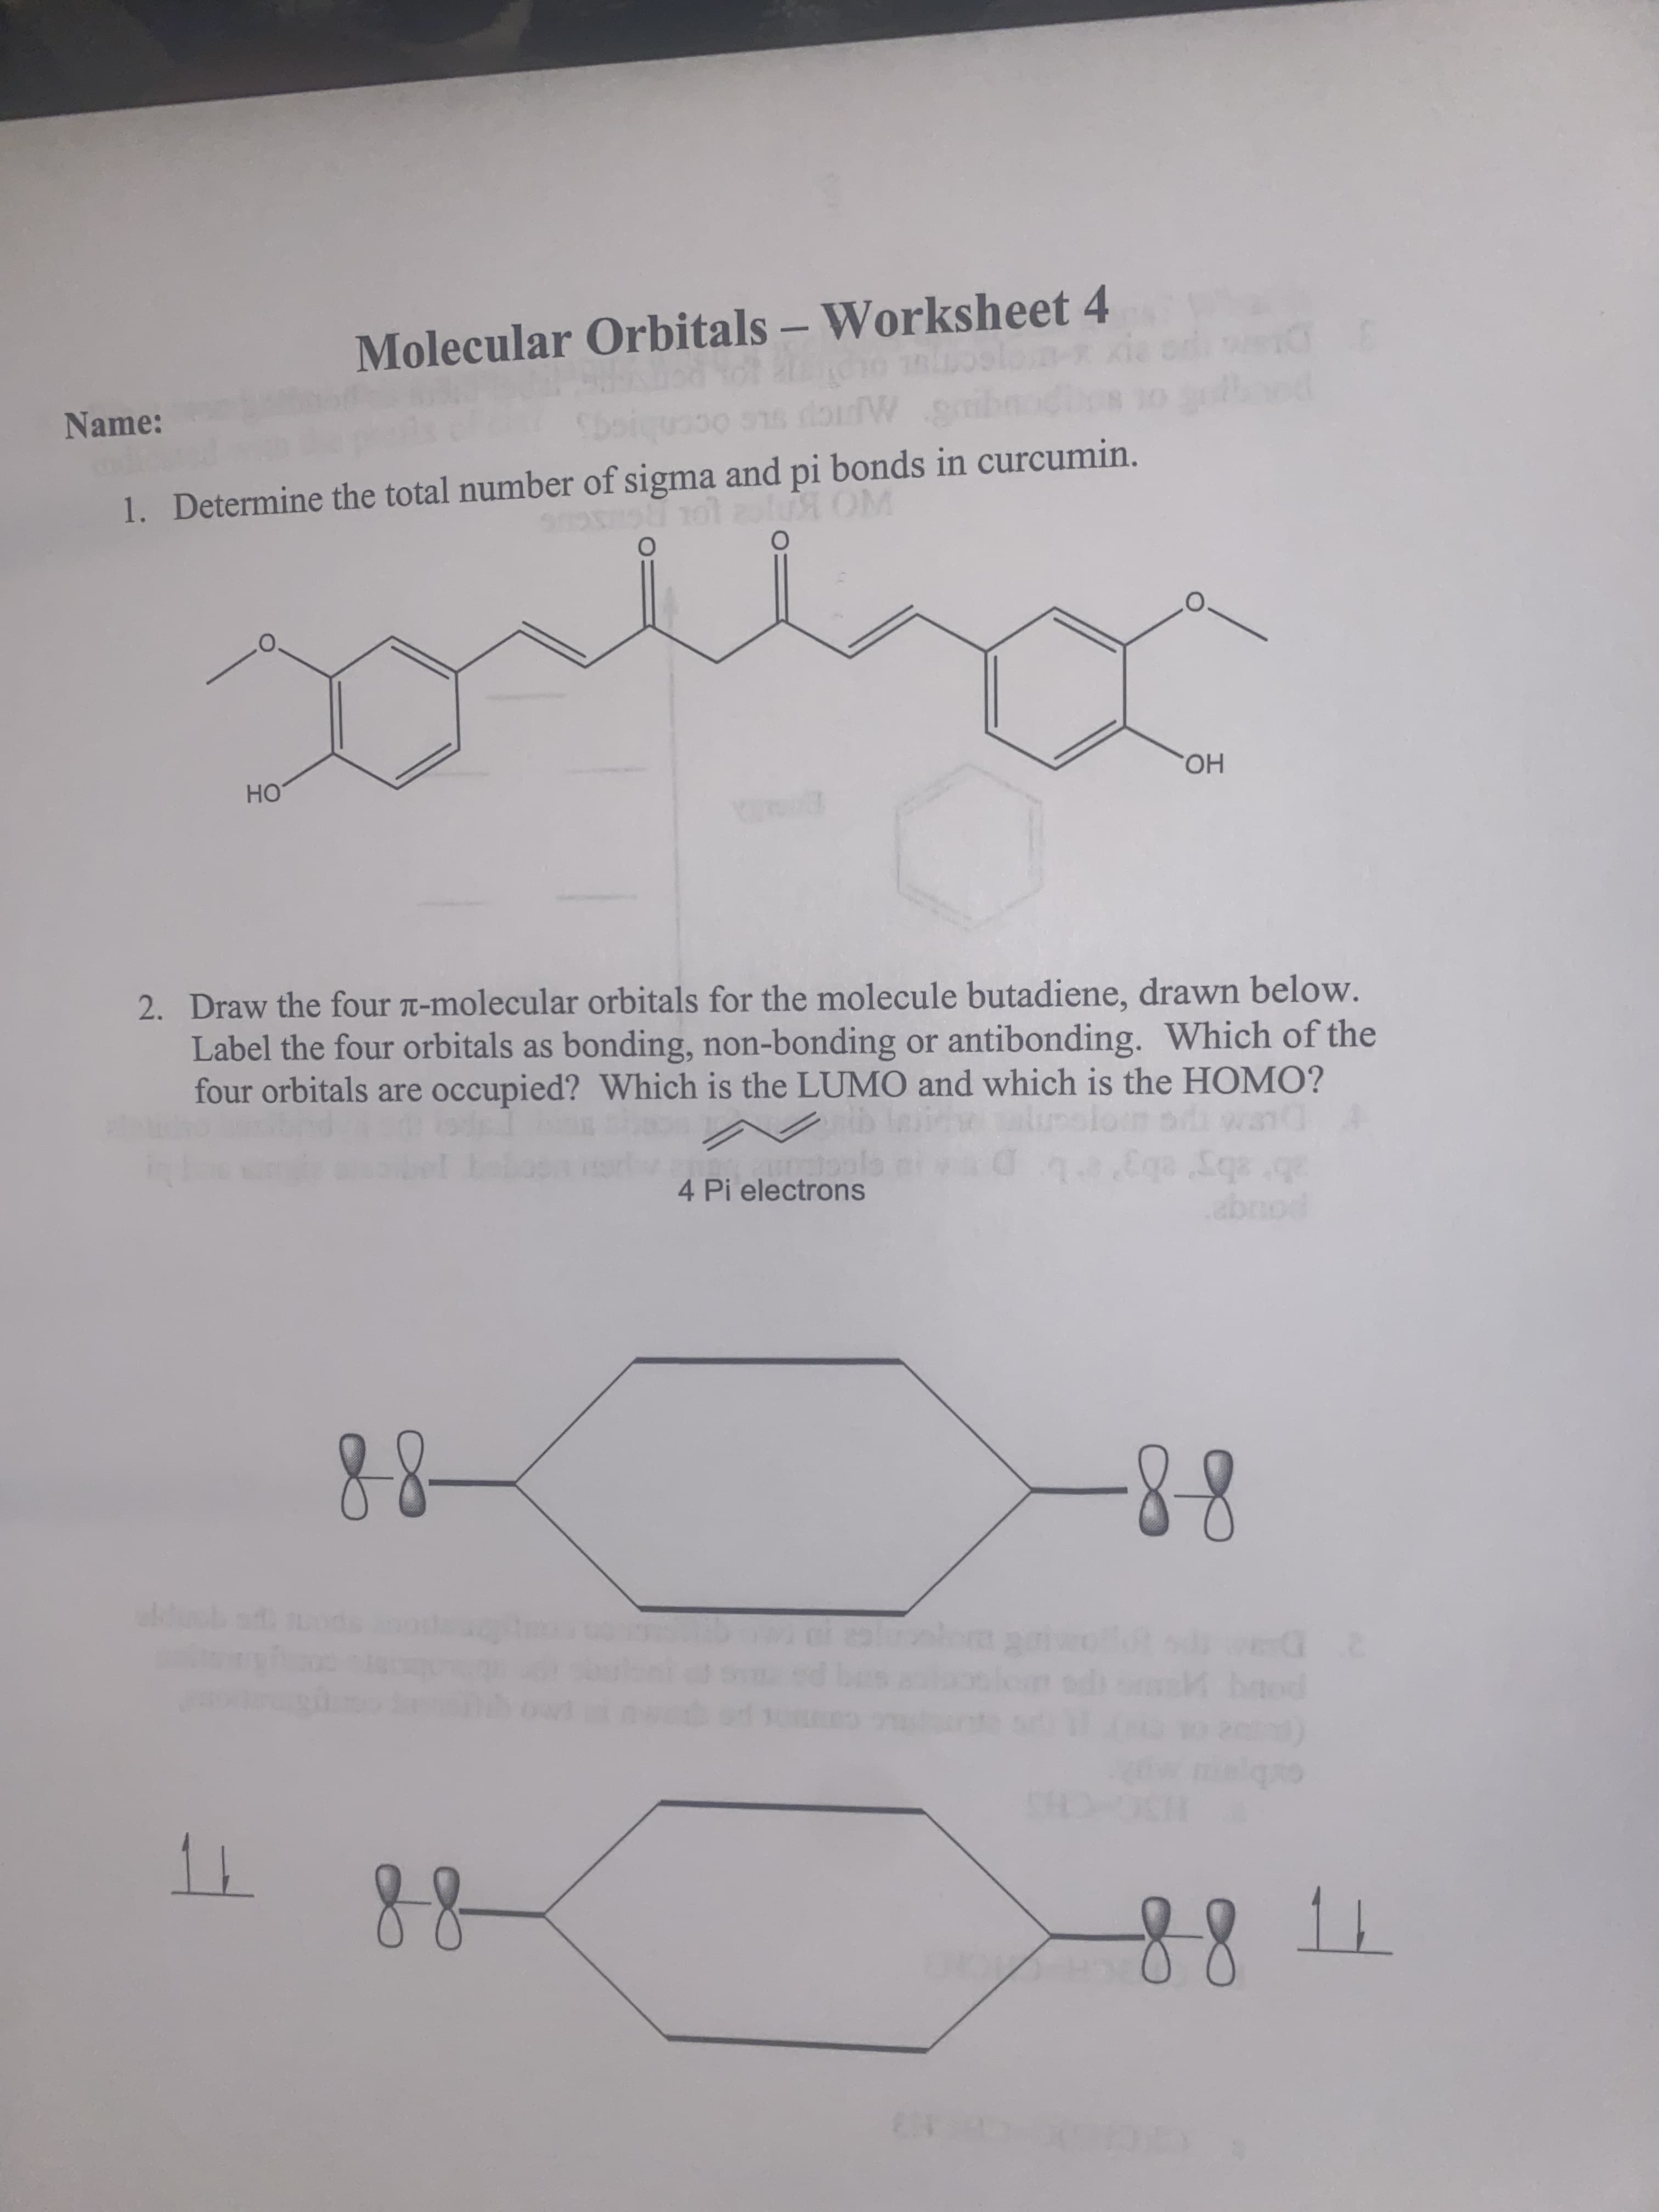 Name:
Molecular Orbitals – Worksheet 4
1. Determine the total number of sigma and pi bonds in curcumin.
UL OLD
HO
2. Draw the four -molecular orbitals for the molecule butadiene, drawn below.
но.
Label the four orbitals as bonding, non-bonding or antibonding. Which of the
four orbitals are occupied? Which is the LUMO and which is the HOMO?
4 Pi electrons
ai wand
ab sby' ebg'eL
pouqe
88
88-
D-
88
SC CHS
88
